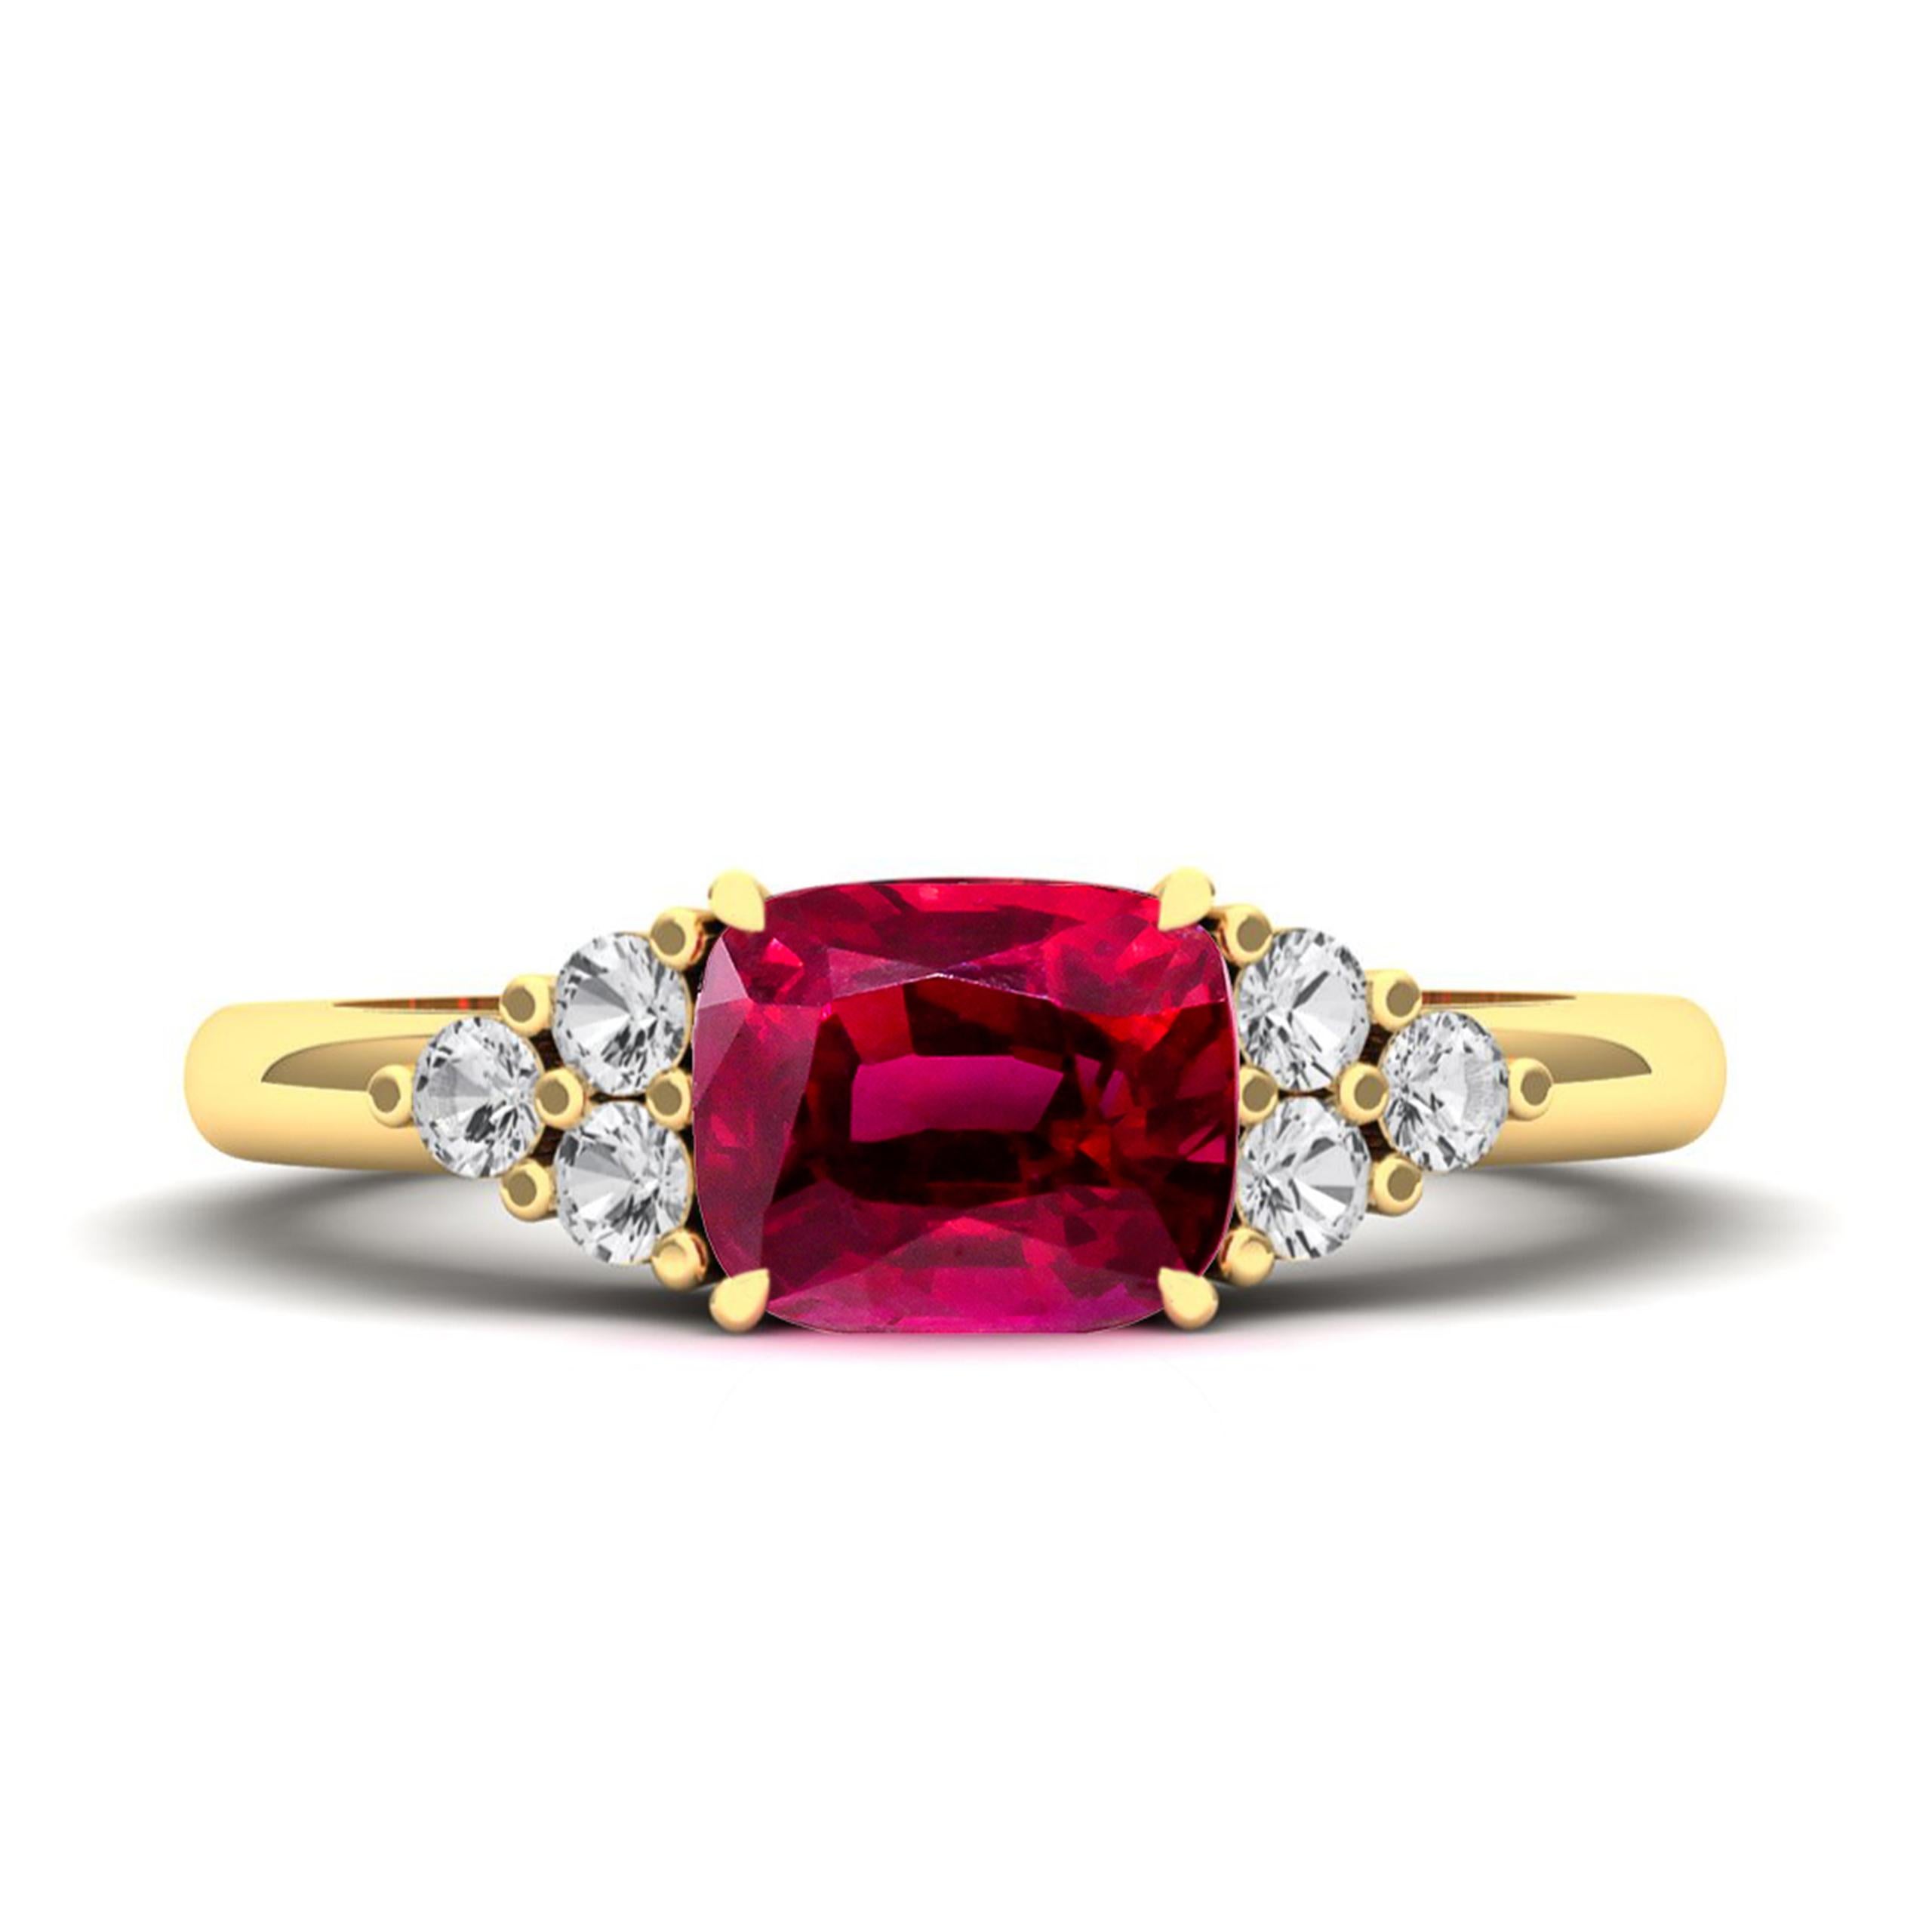 Experience timeless elegance with our custom-made ring featuring a 1.55-carat natural untreated Ruby. This captivating gem is adorned with conflict-free diamonds, set in a side cluster design. Certified by Emteem Gem Labs, the ring is custom-crafted